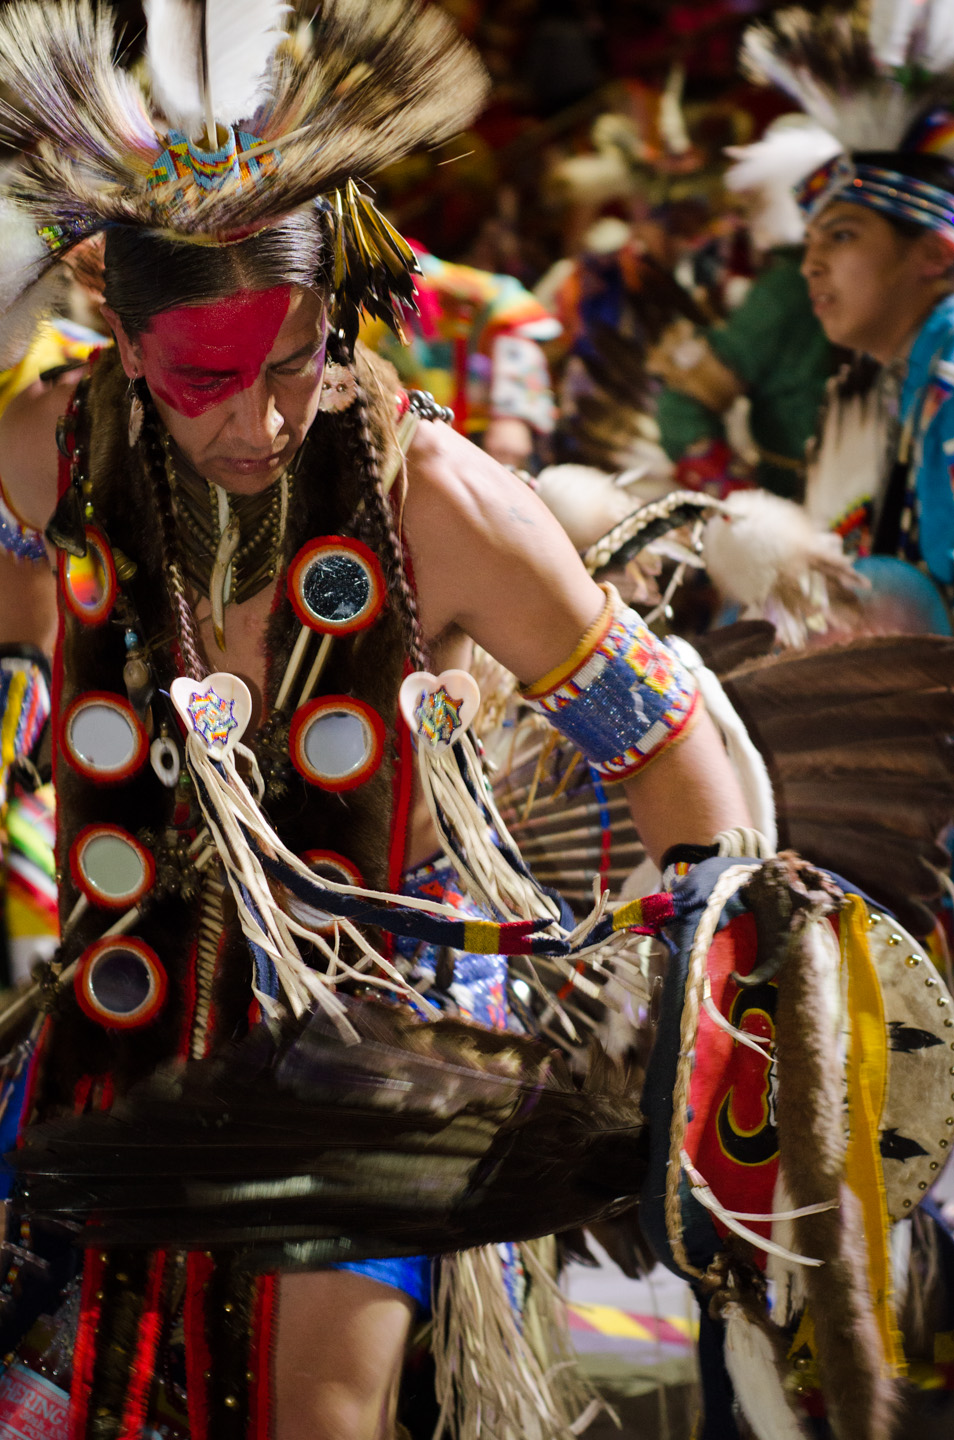 The regalia from various tribes displayed a wide variety of color and symbolism.